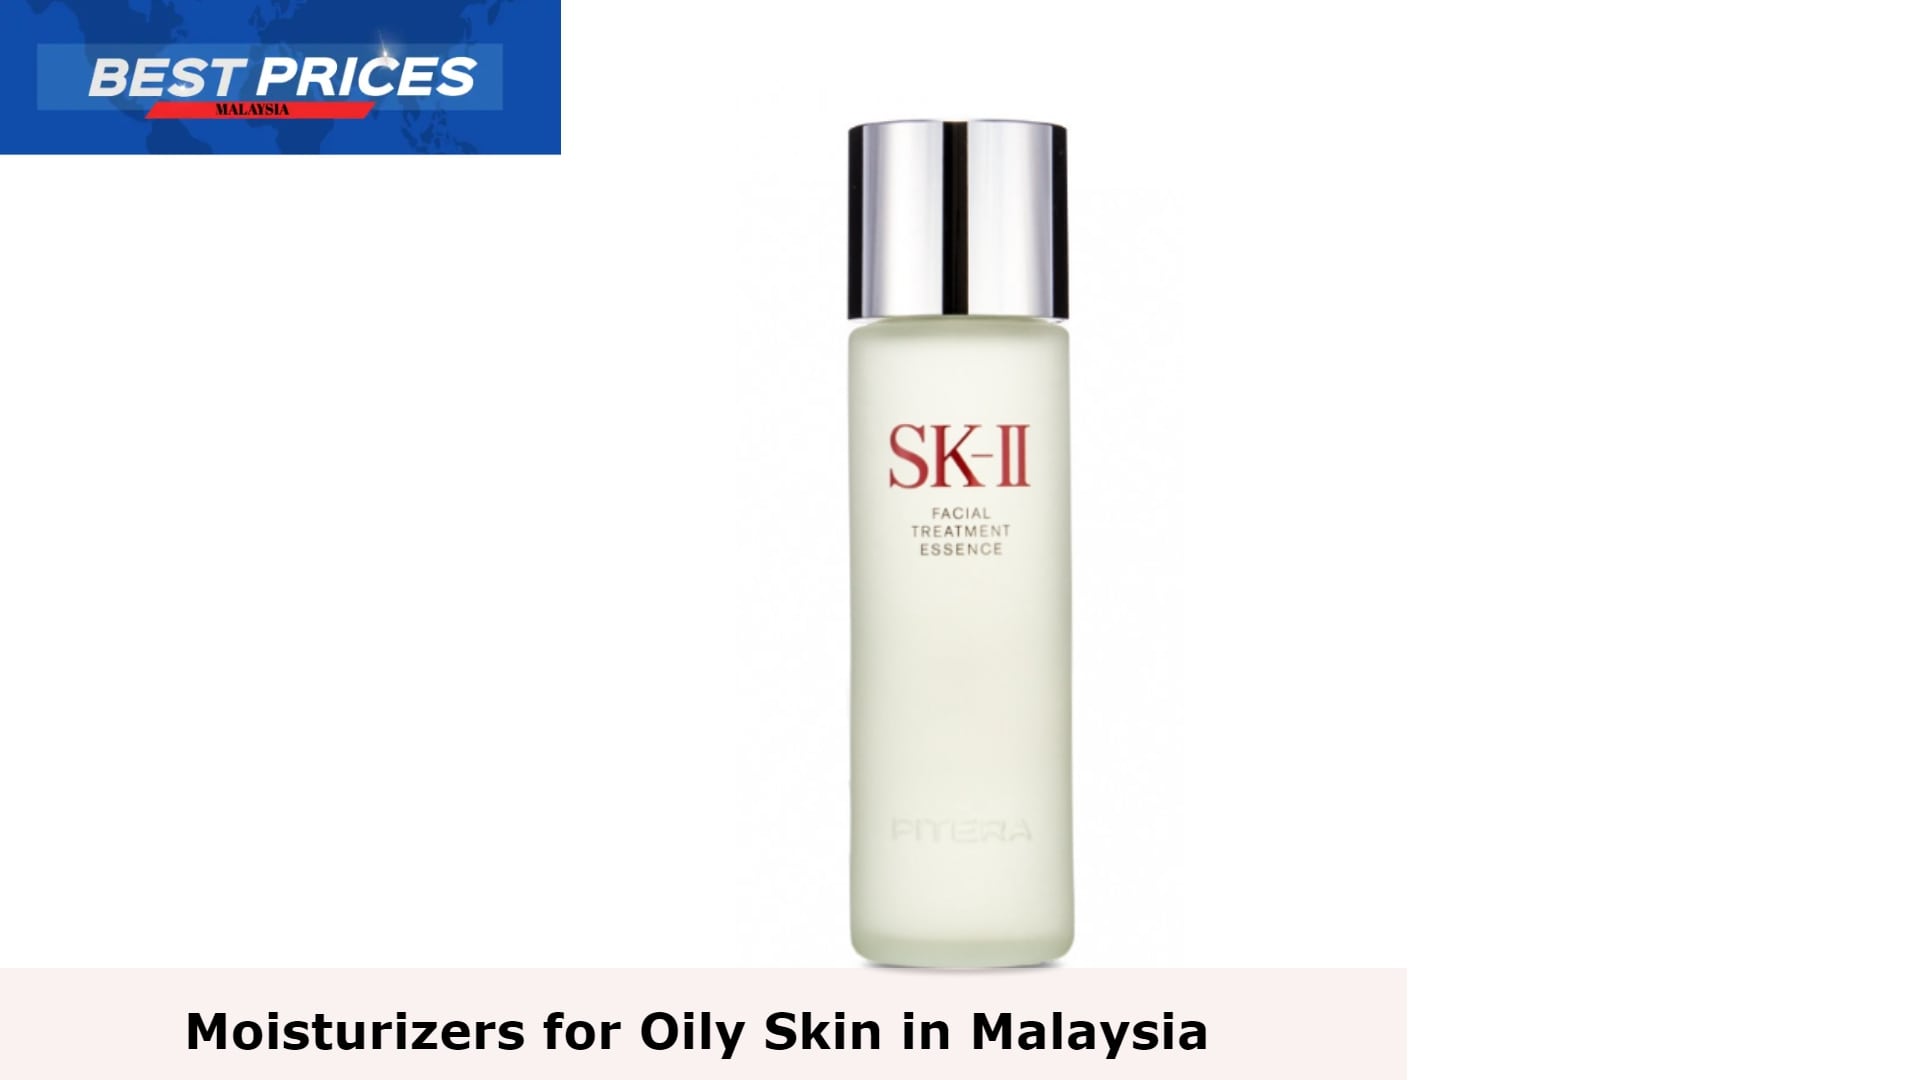 SK-II Facial Treatment Essence 230 mL - Moisturizers for Oily Skin in Malaysia, Which moisturizer is best for oily skin?, Moisturizers Oily Skin Malaysia, Should I put moisturizer on if I have oily skin?, Which is the best moisturizer for oily acne-prone skin?, best moisturizer for oily acne-prone skin, oil-free moisturizer for oily skin, best moisturiser for oily skin and open pores, best moisturizer for oily skin in summer, best moisturizer for acne-prone skin, water-based moisturizer for oily skin, gel moisturizer for oily skin, best moisturizer for oily skin with spf, Does oily acne skin need moisturizer?, Which moisturiser is best for acne prone skin?, Is oily moisturizer good for oily skin?,